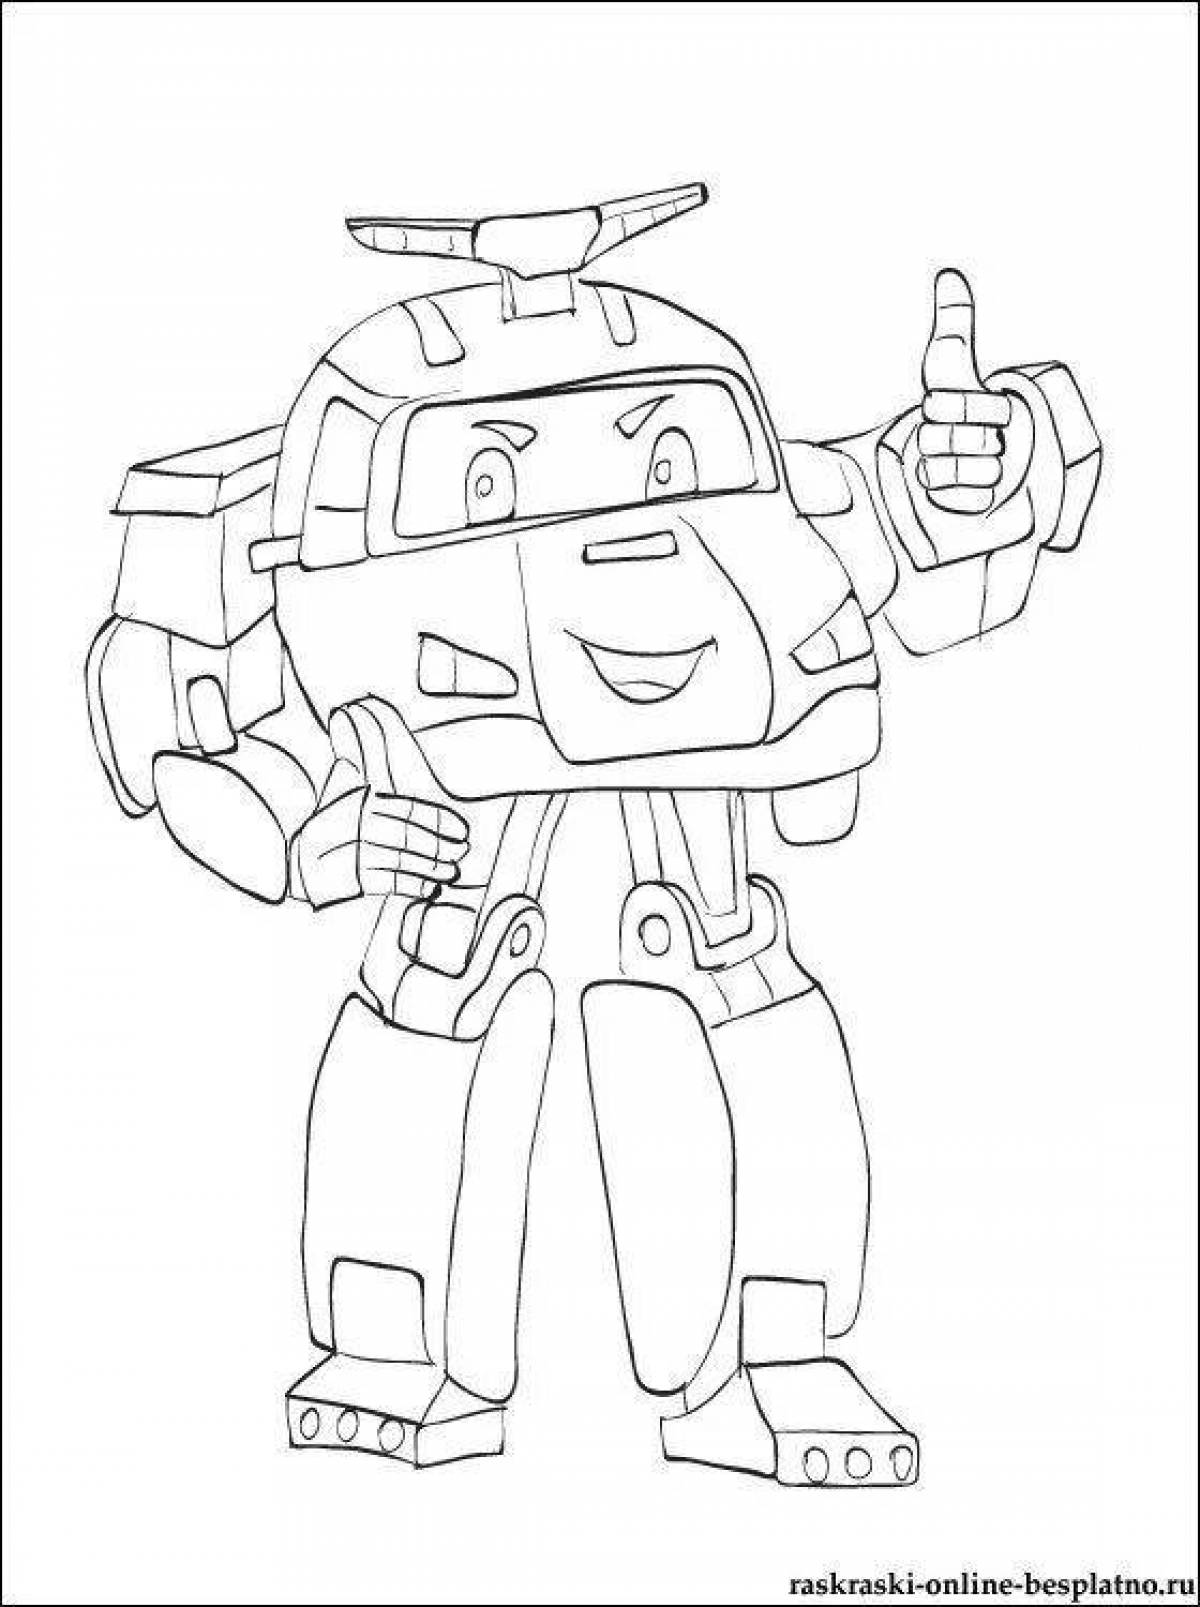 Coloring page funny police robot